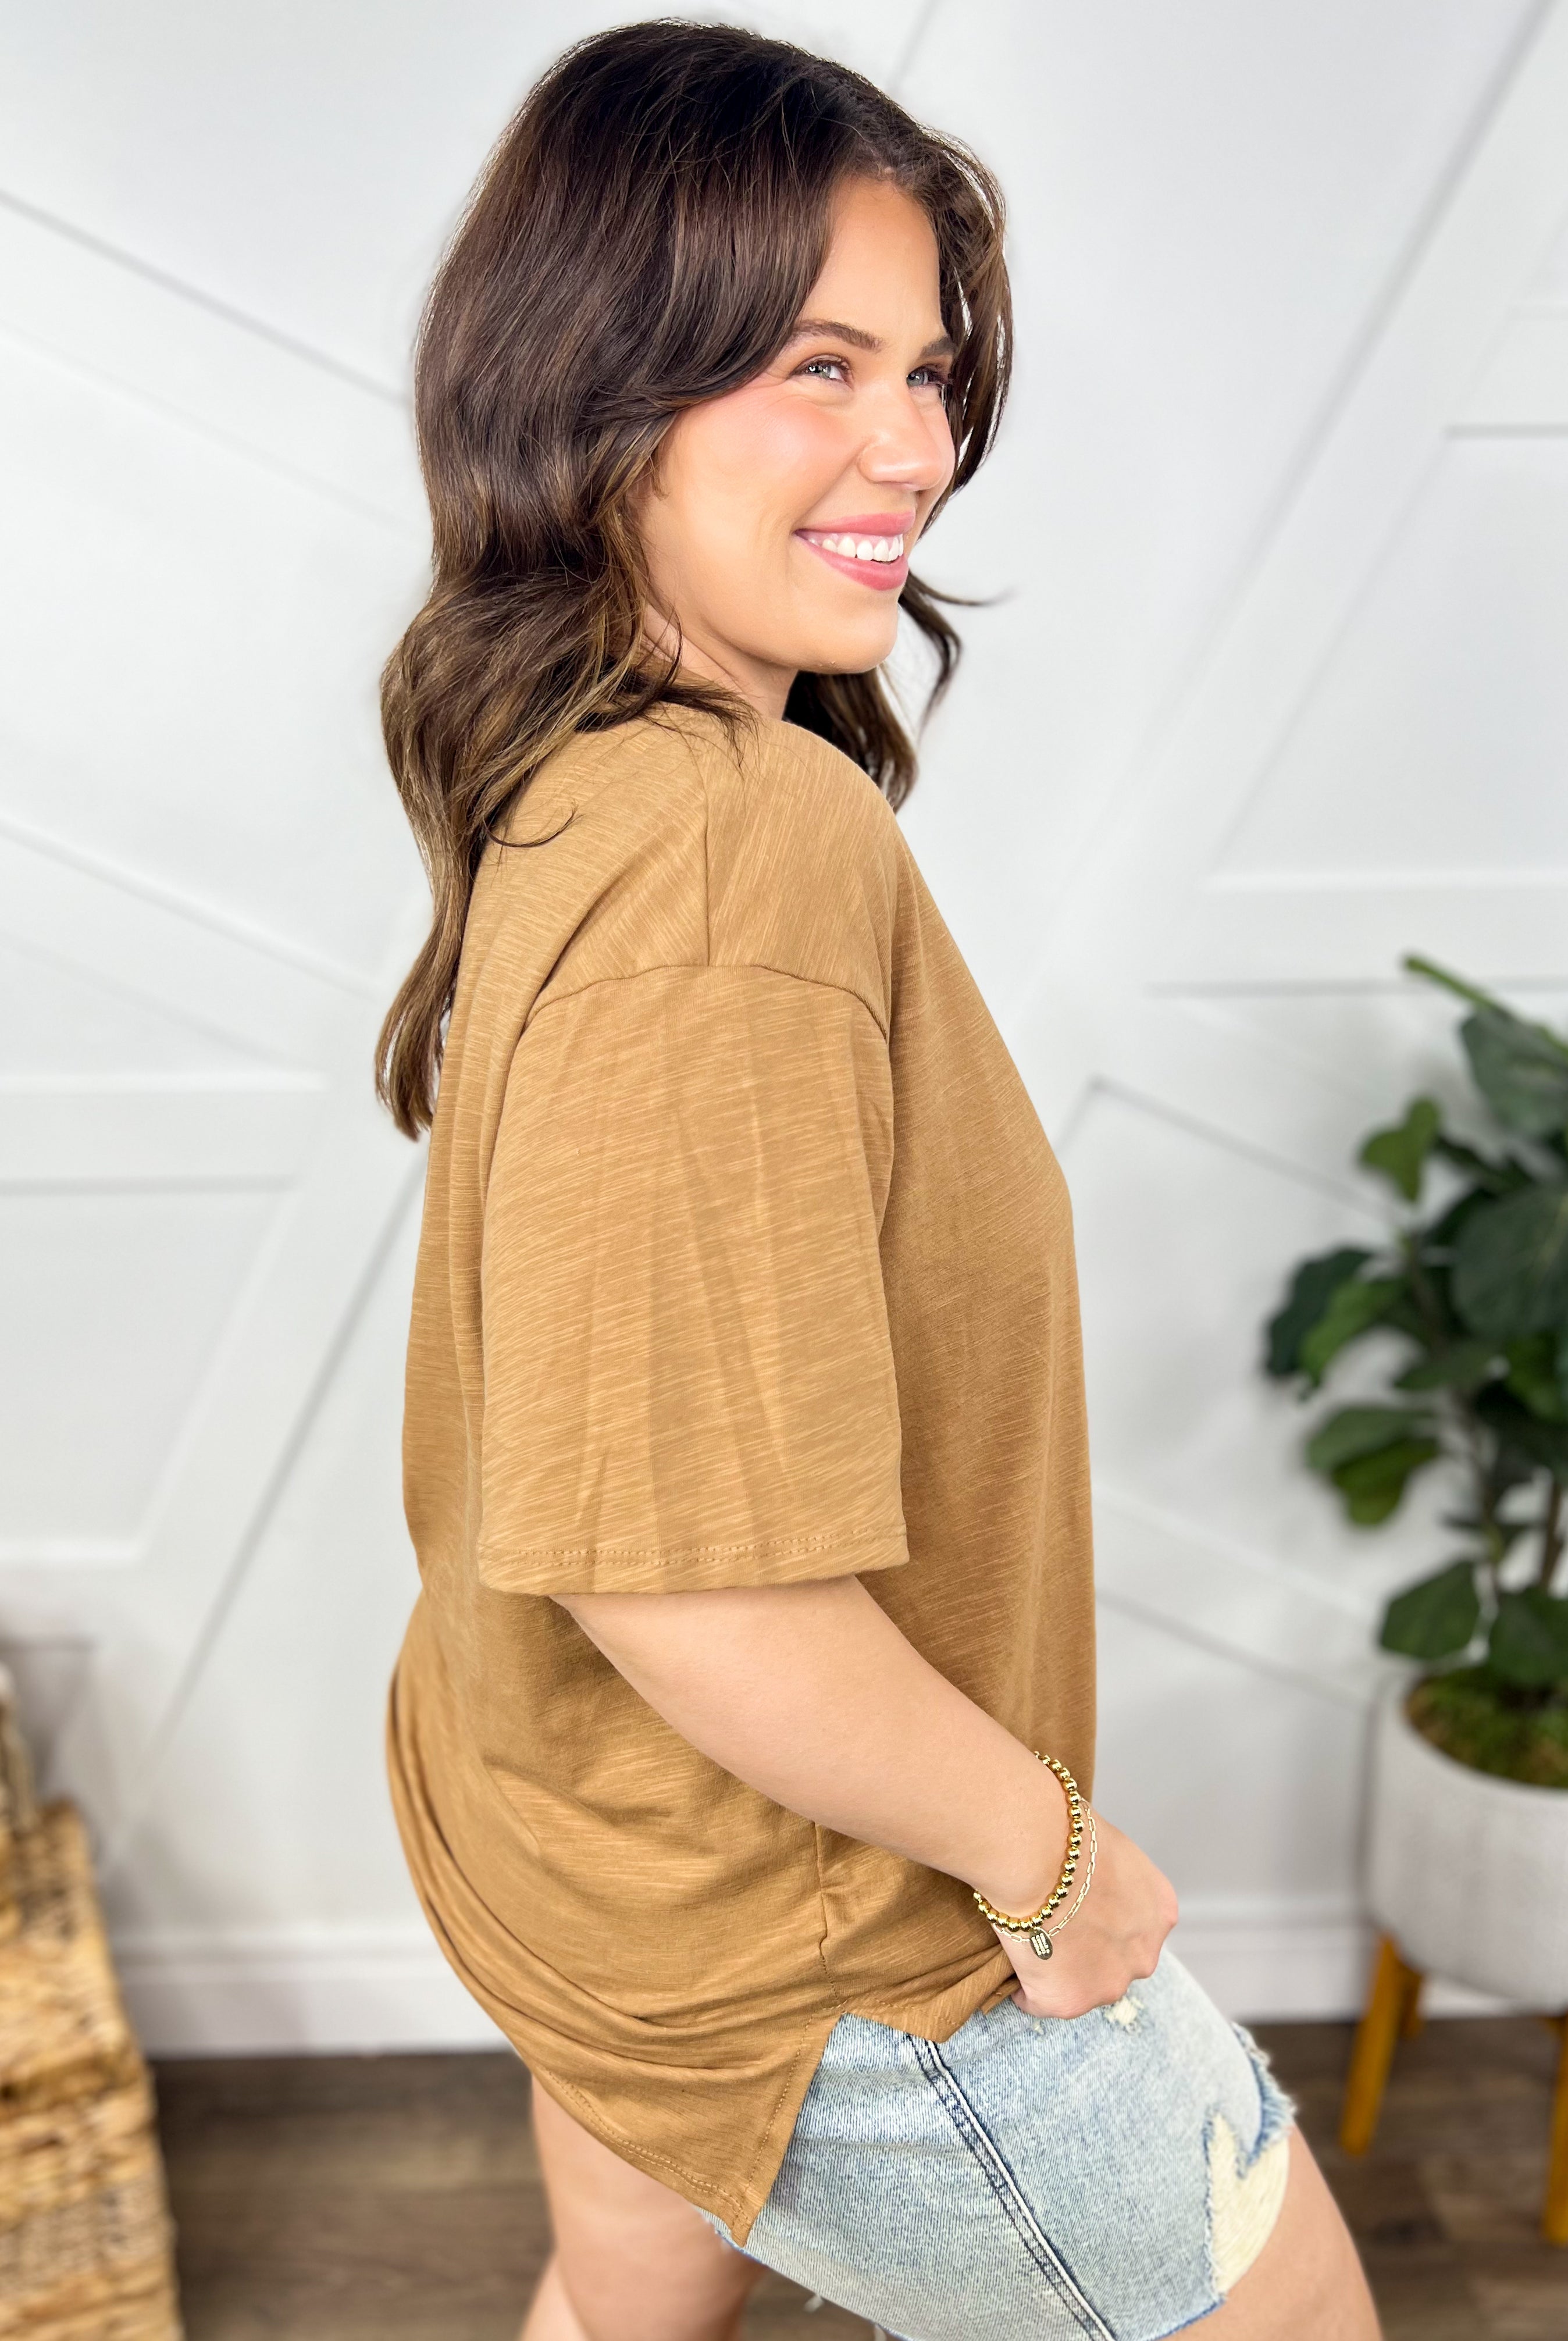 RESTOCK: Fan Favorite Top-110 Short Sleeve Top-STYLIVE-Heathered Boho Boutique, Women's Fashion and Accessories in Palmetto, FL